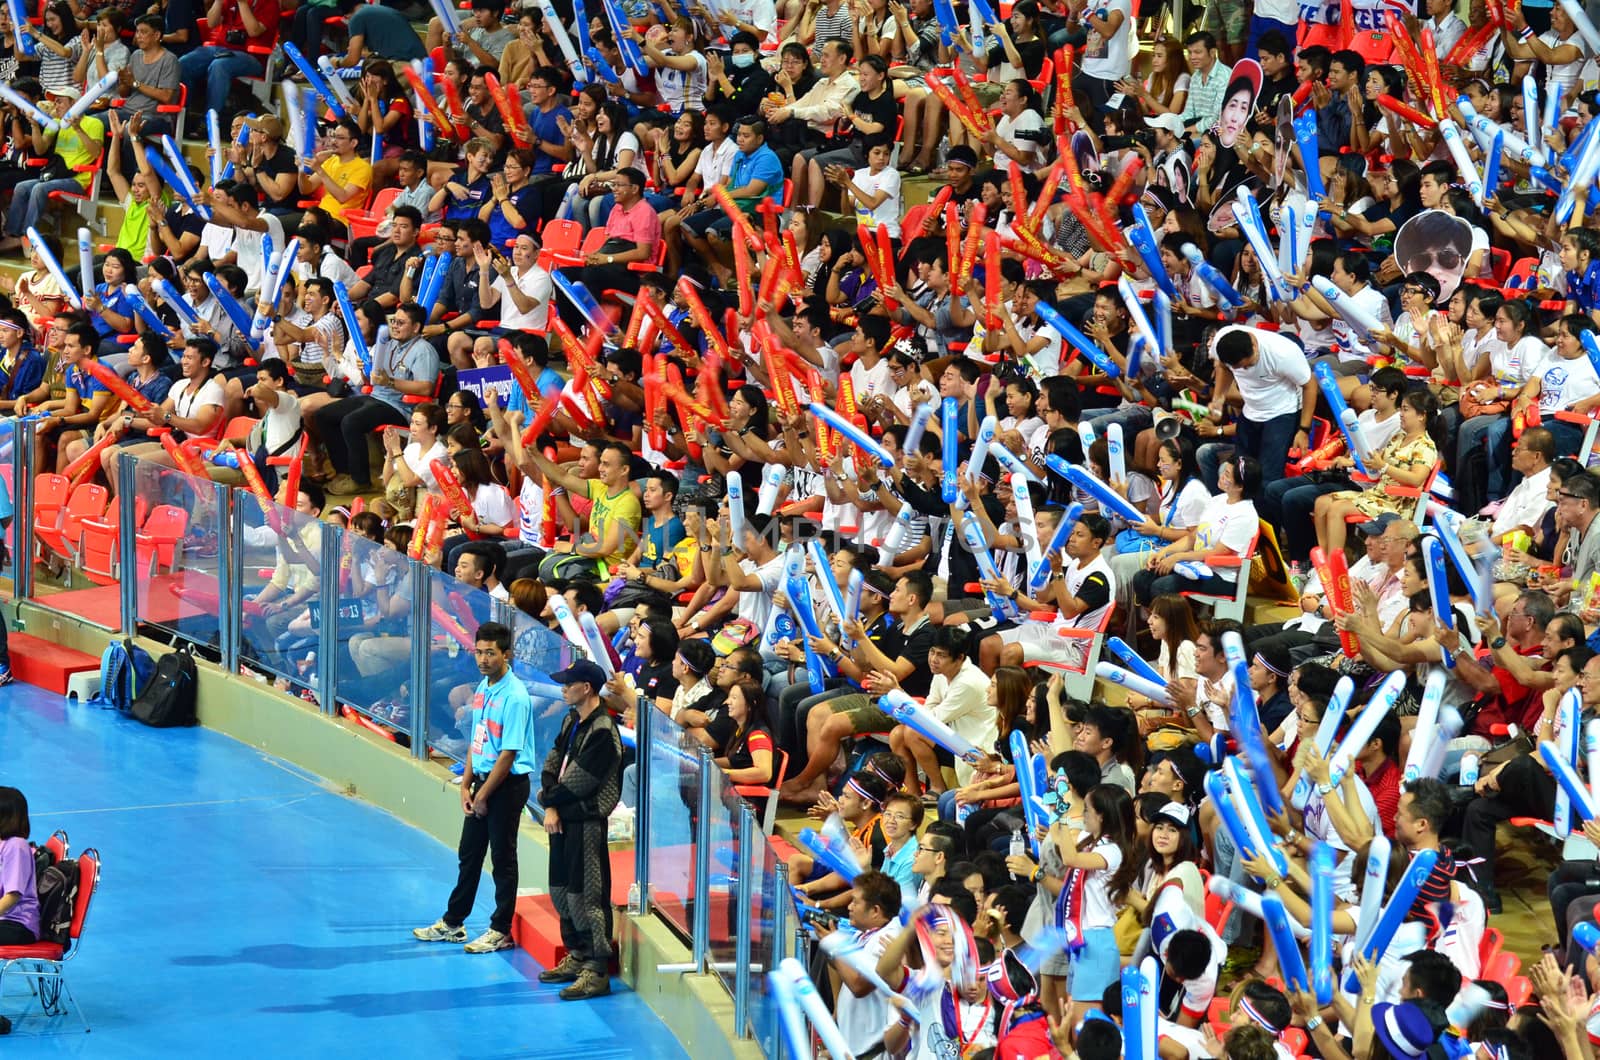 Bangkok, Thailand - July 3, 2015: Thai supporters celebrates a Thailand point at Indoor Stadium Huamark during the FIVB Volleyball World Grand Prix Thailand and Serbia on July 3, 2015 in Bangkok, Thailand.